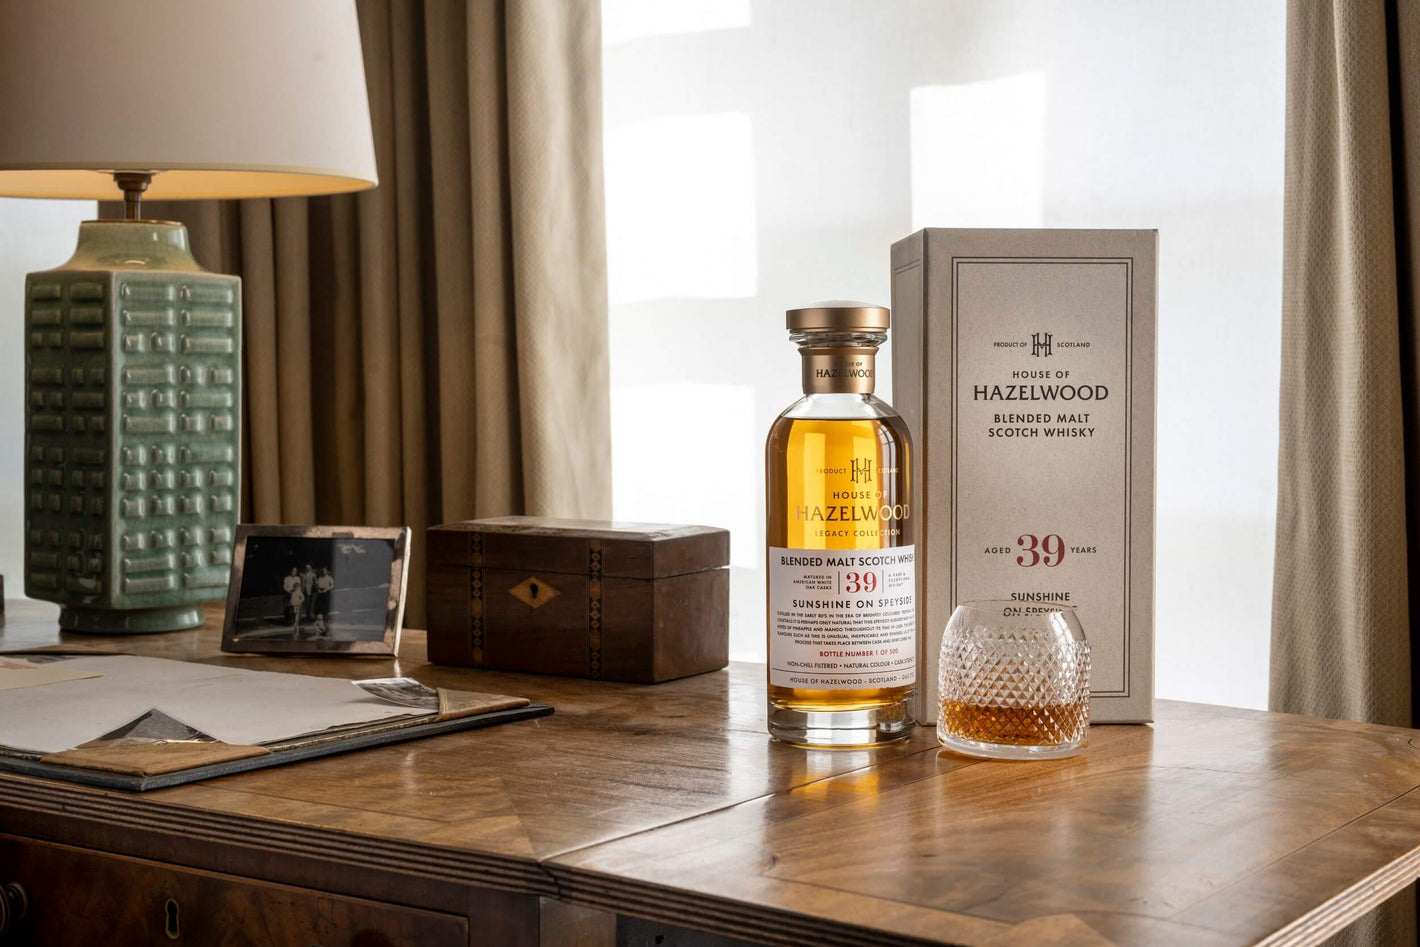 A bottle of Sunshine on Speyside next to its box, sitting on a desk.